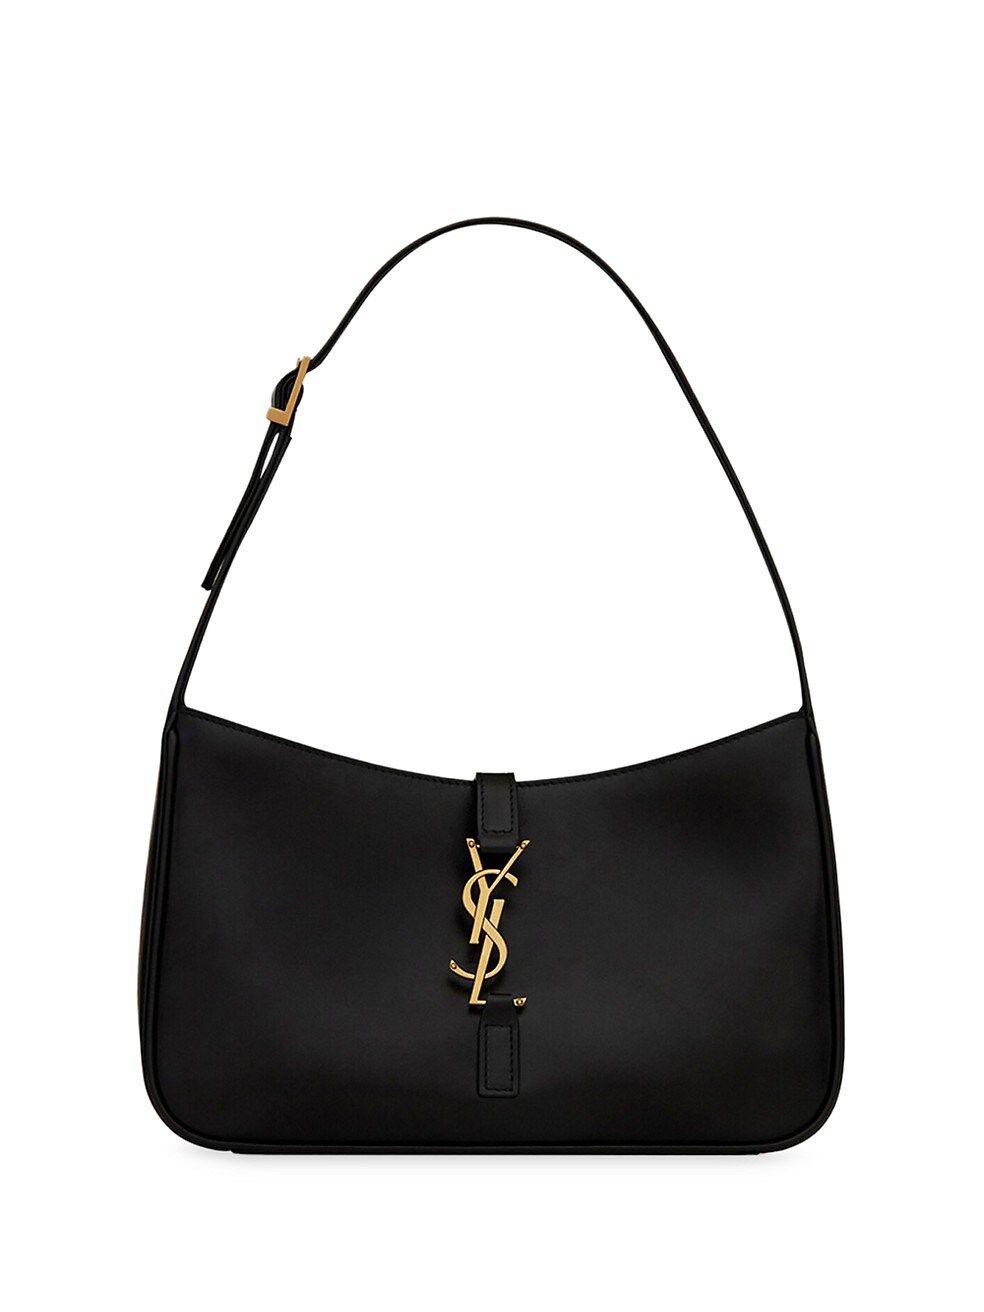 Saint Laurent Le 5 7 Hobo Bag In Smooth Leather | Saks Fifth Avenue